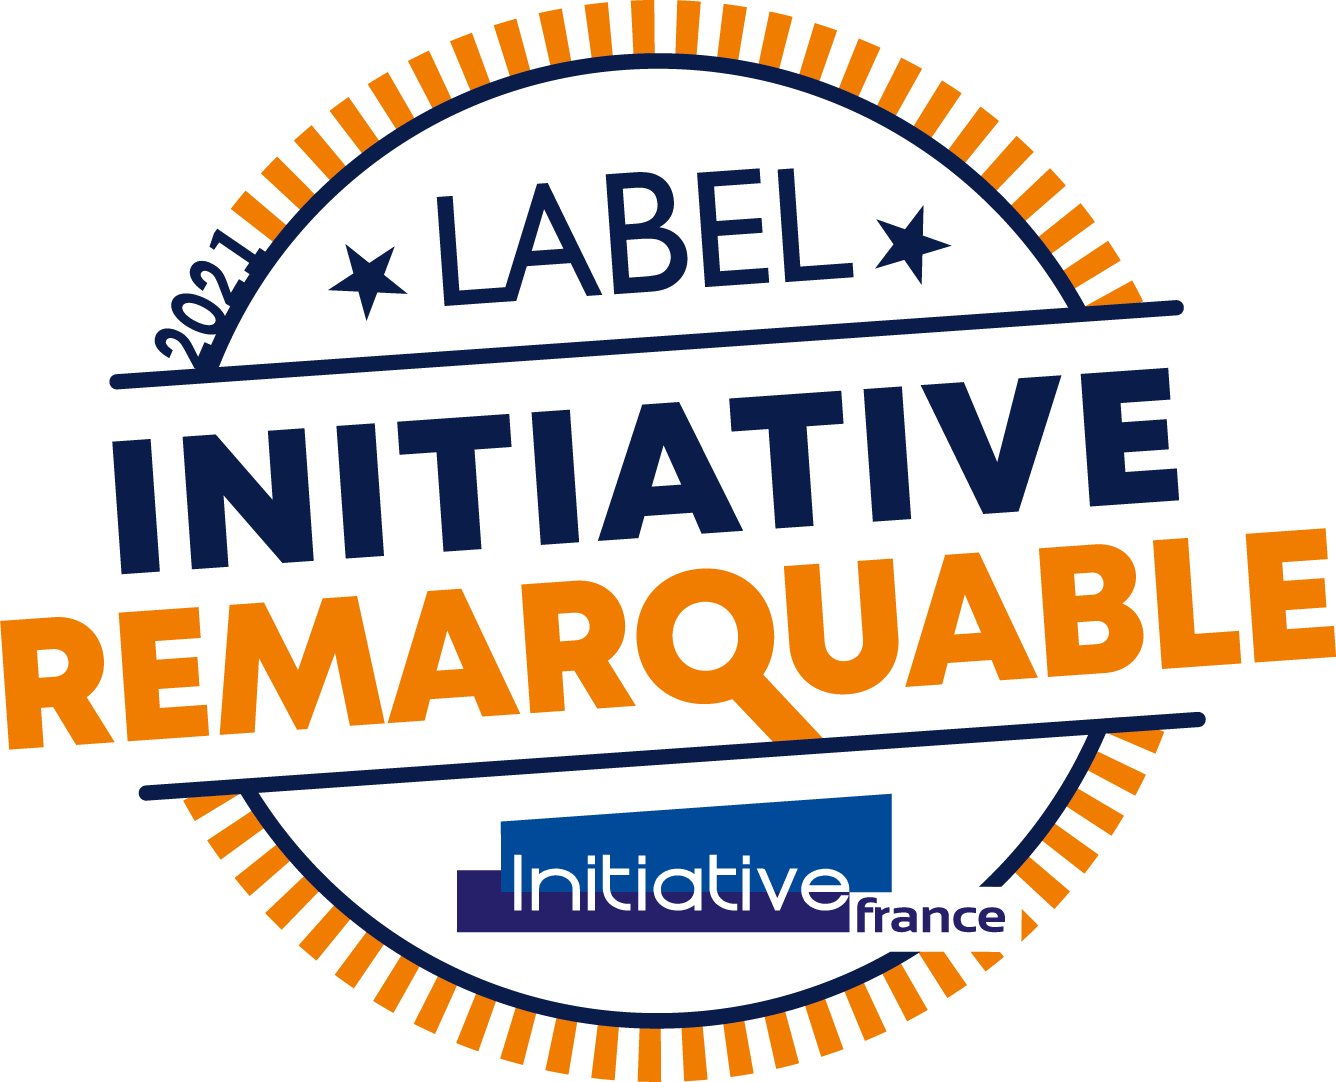 logo initiative remarquable france